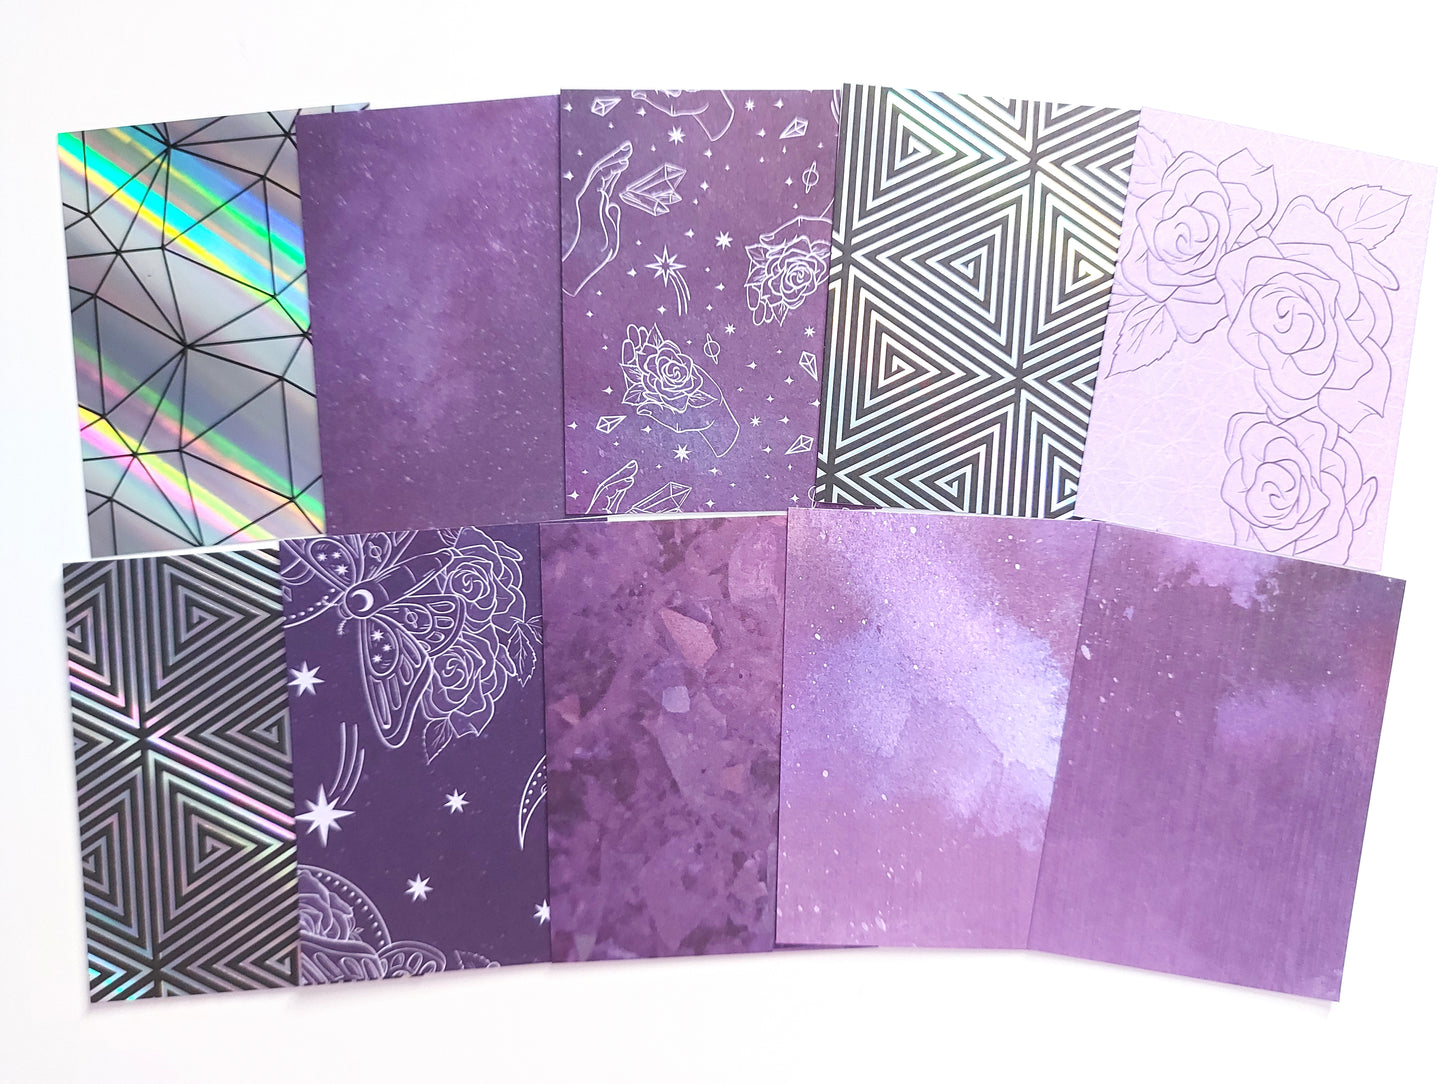 10 3x4 inch Journal Cards |Set 9|